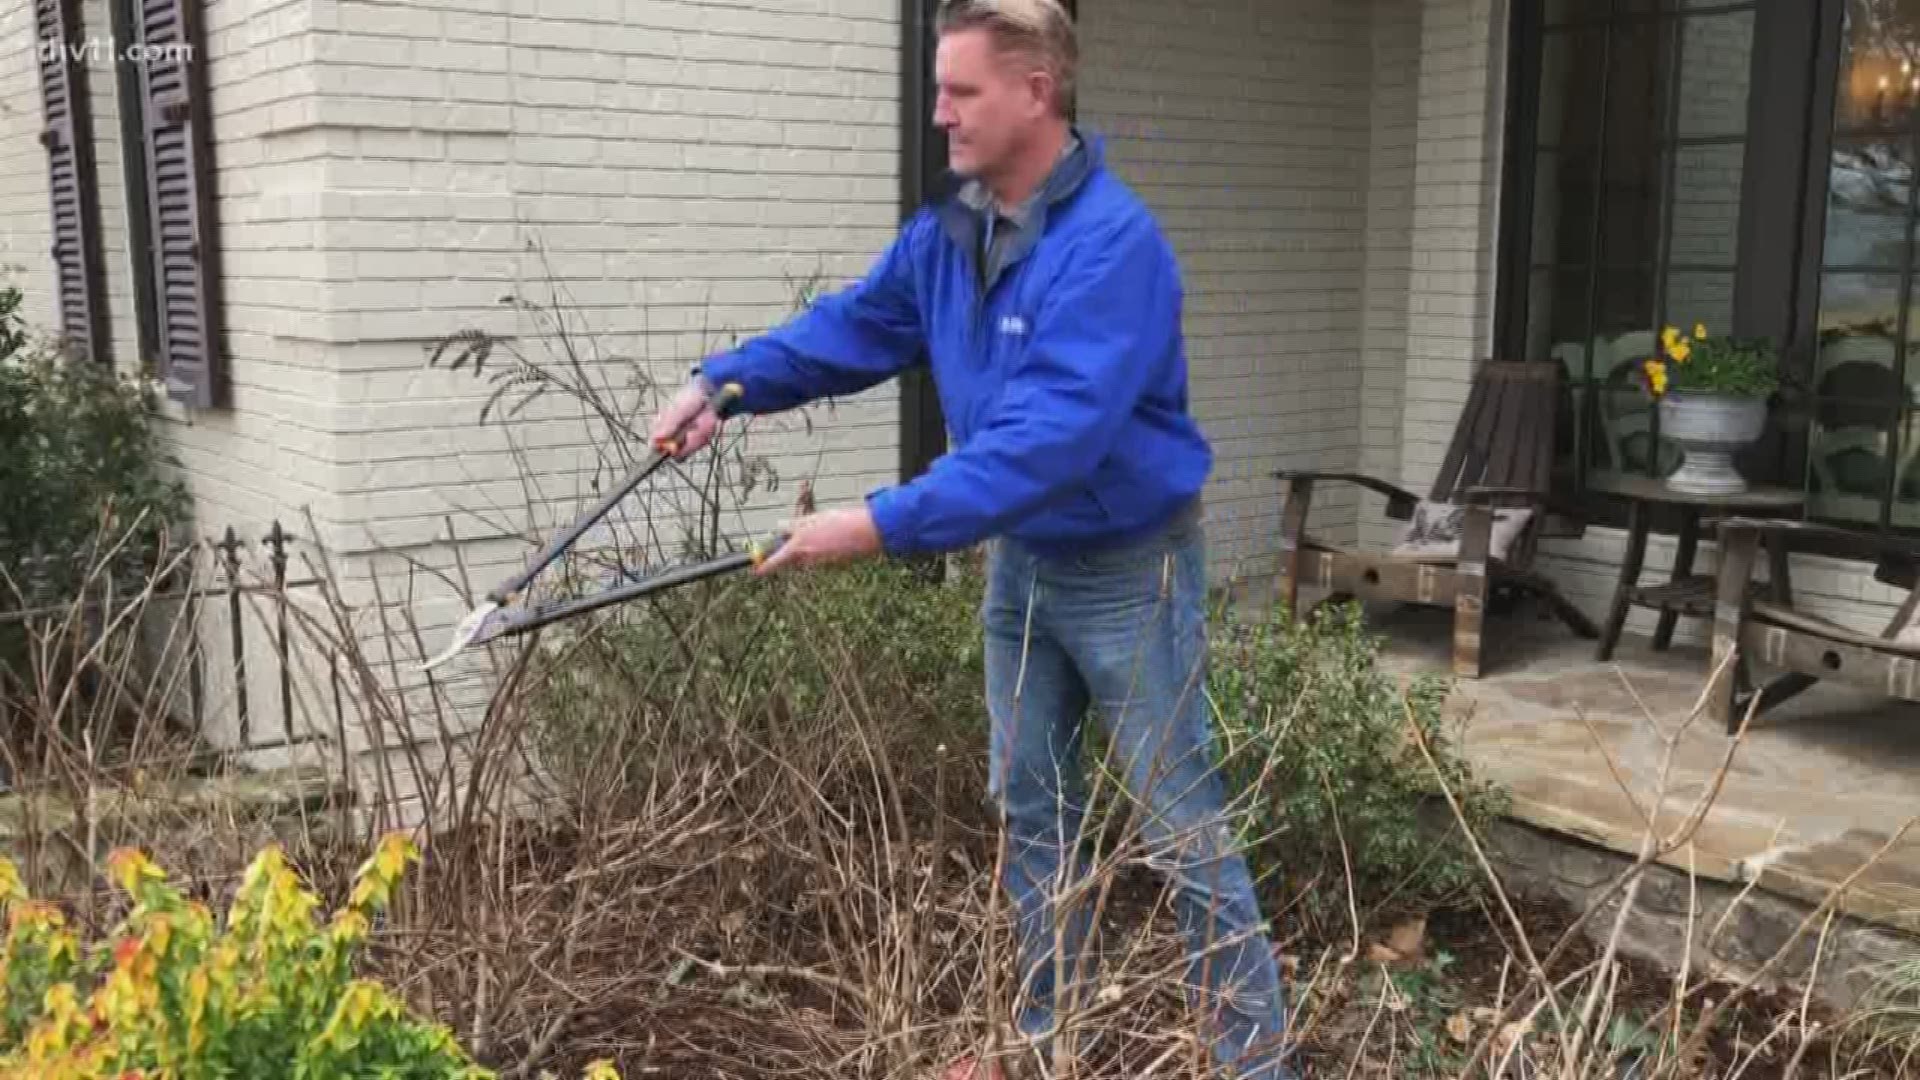 When it is time to prune those plants? What kind of mulch should we use in our flower beds? Chris H. Olsen is answering your winter garden questions.